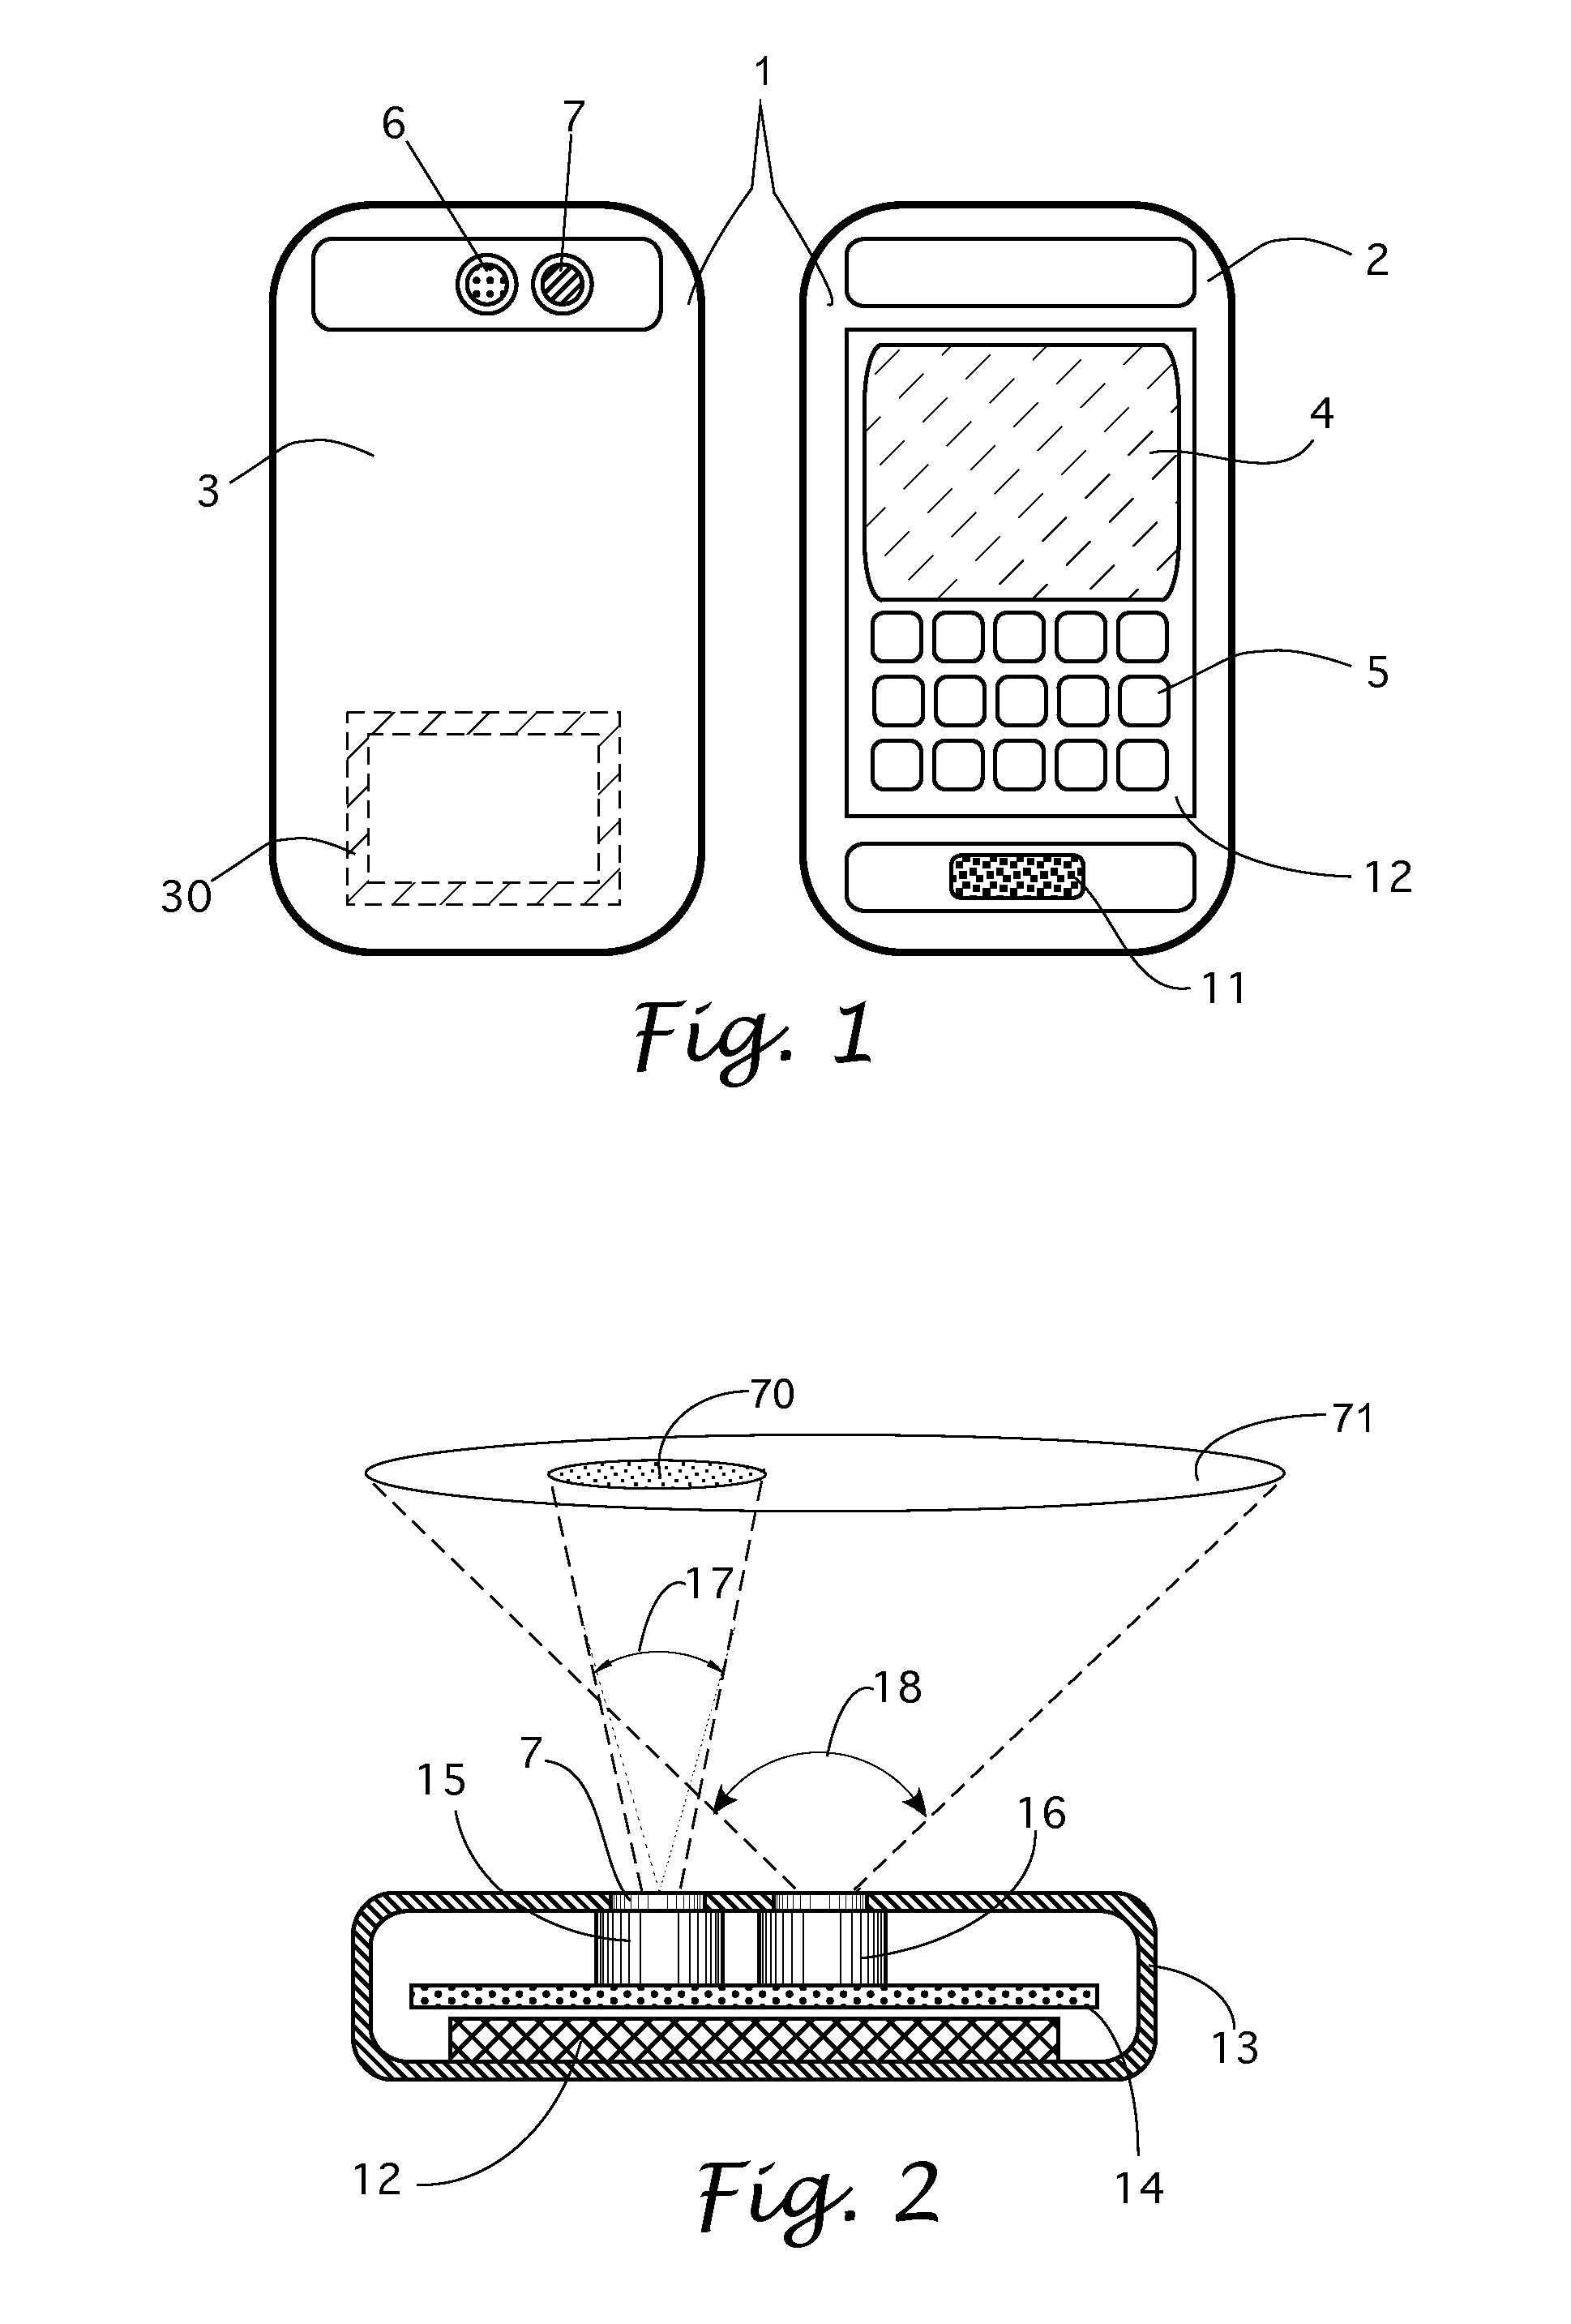 Wireless communication device with integrated electromagnetic radiation sensors